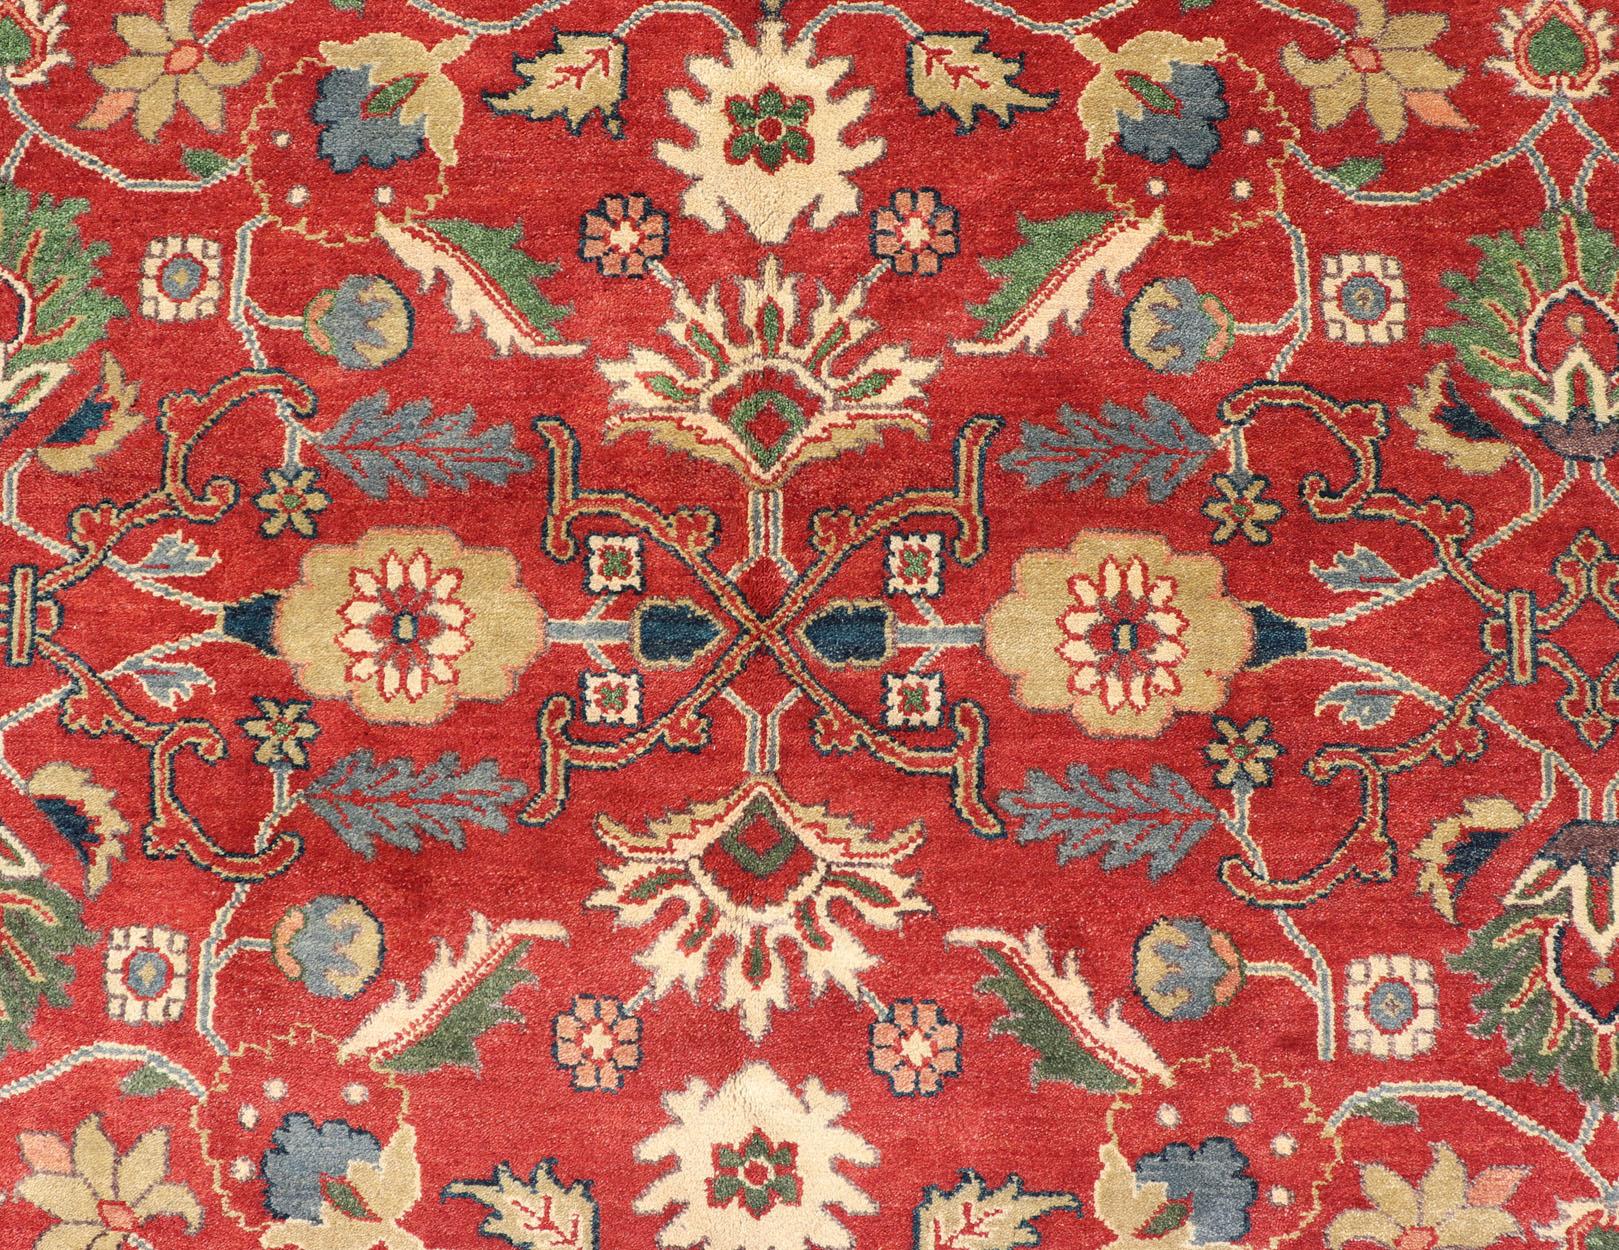 Contemporary Reproduction Sultanabad-Mahal All-over Floral Hand-Knotted Carpet 